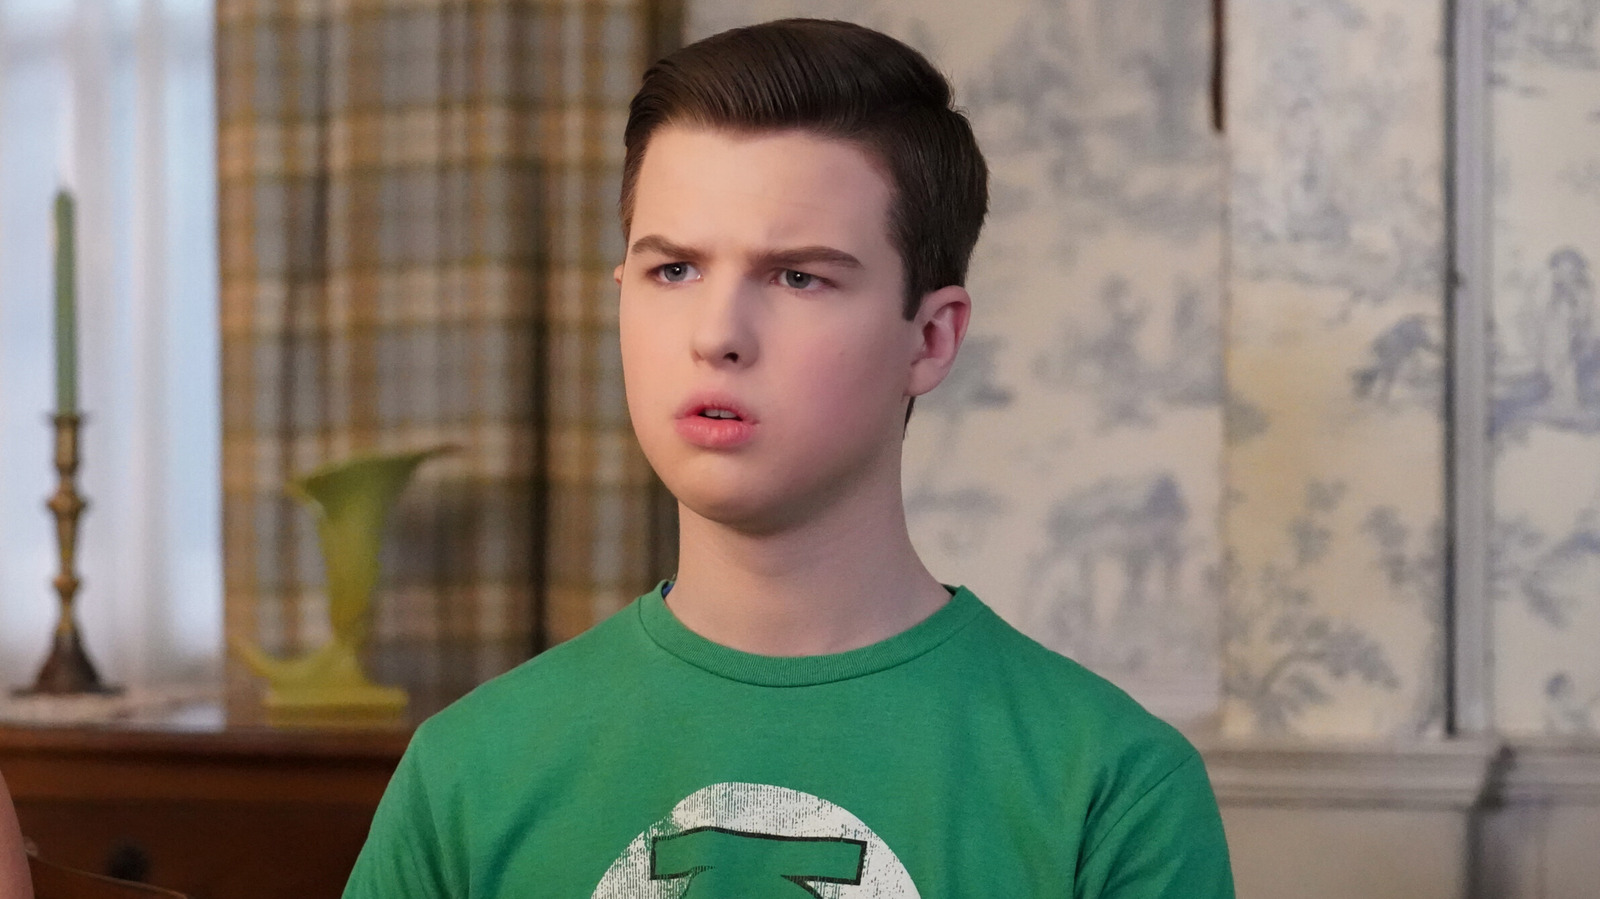 Young Sheldon Season 7 Reveals Sheldon's First Word & It's What You'd Expect